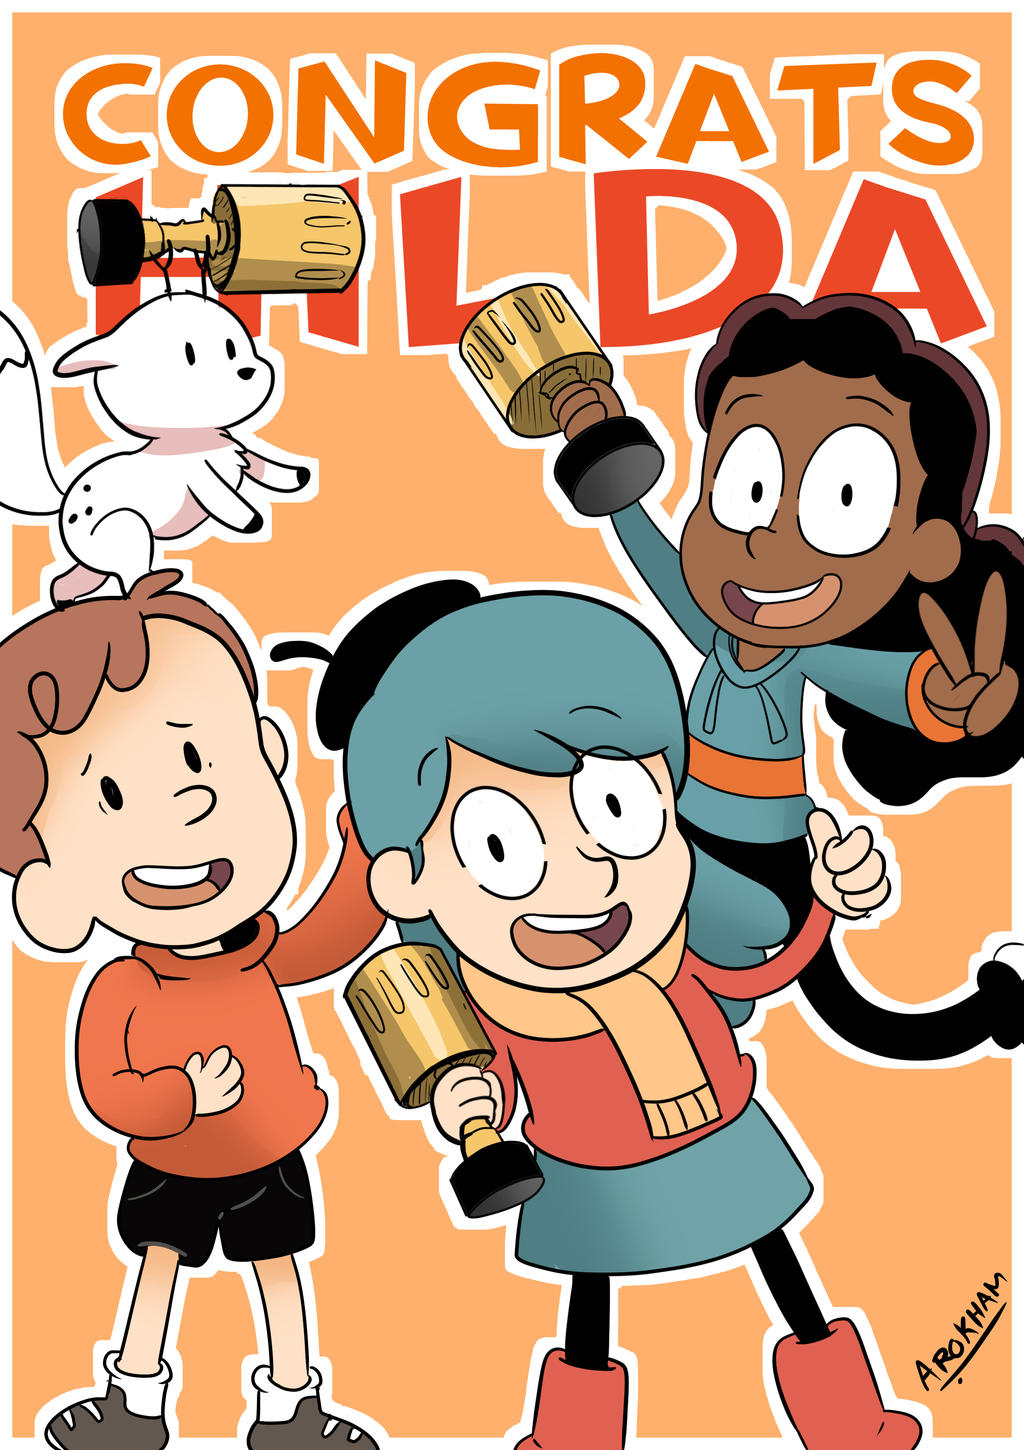 Hilda - Congrats to the entire team!! Netflix Family